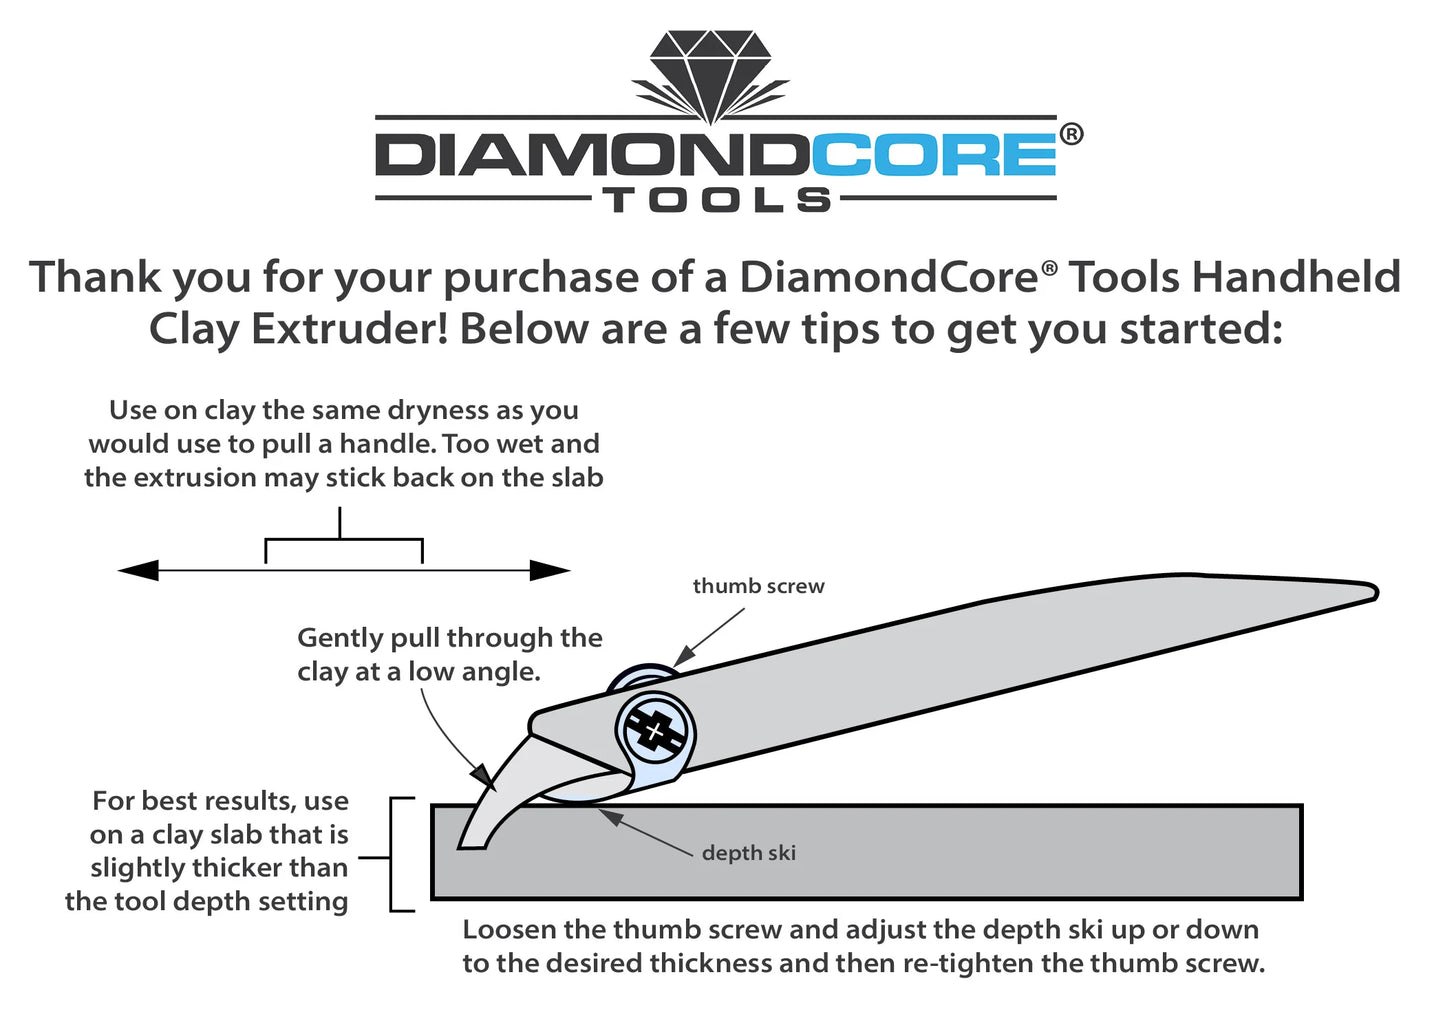 DiamondCore Tools - Square Trapezoid Wall XL Handheld Clay Extruder (R210)